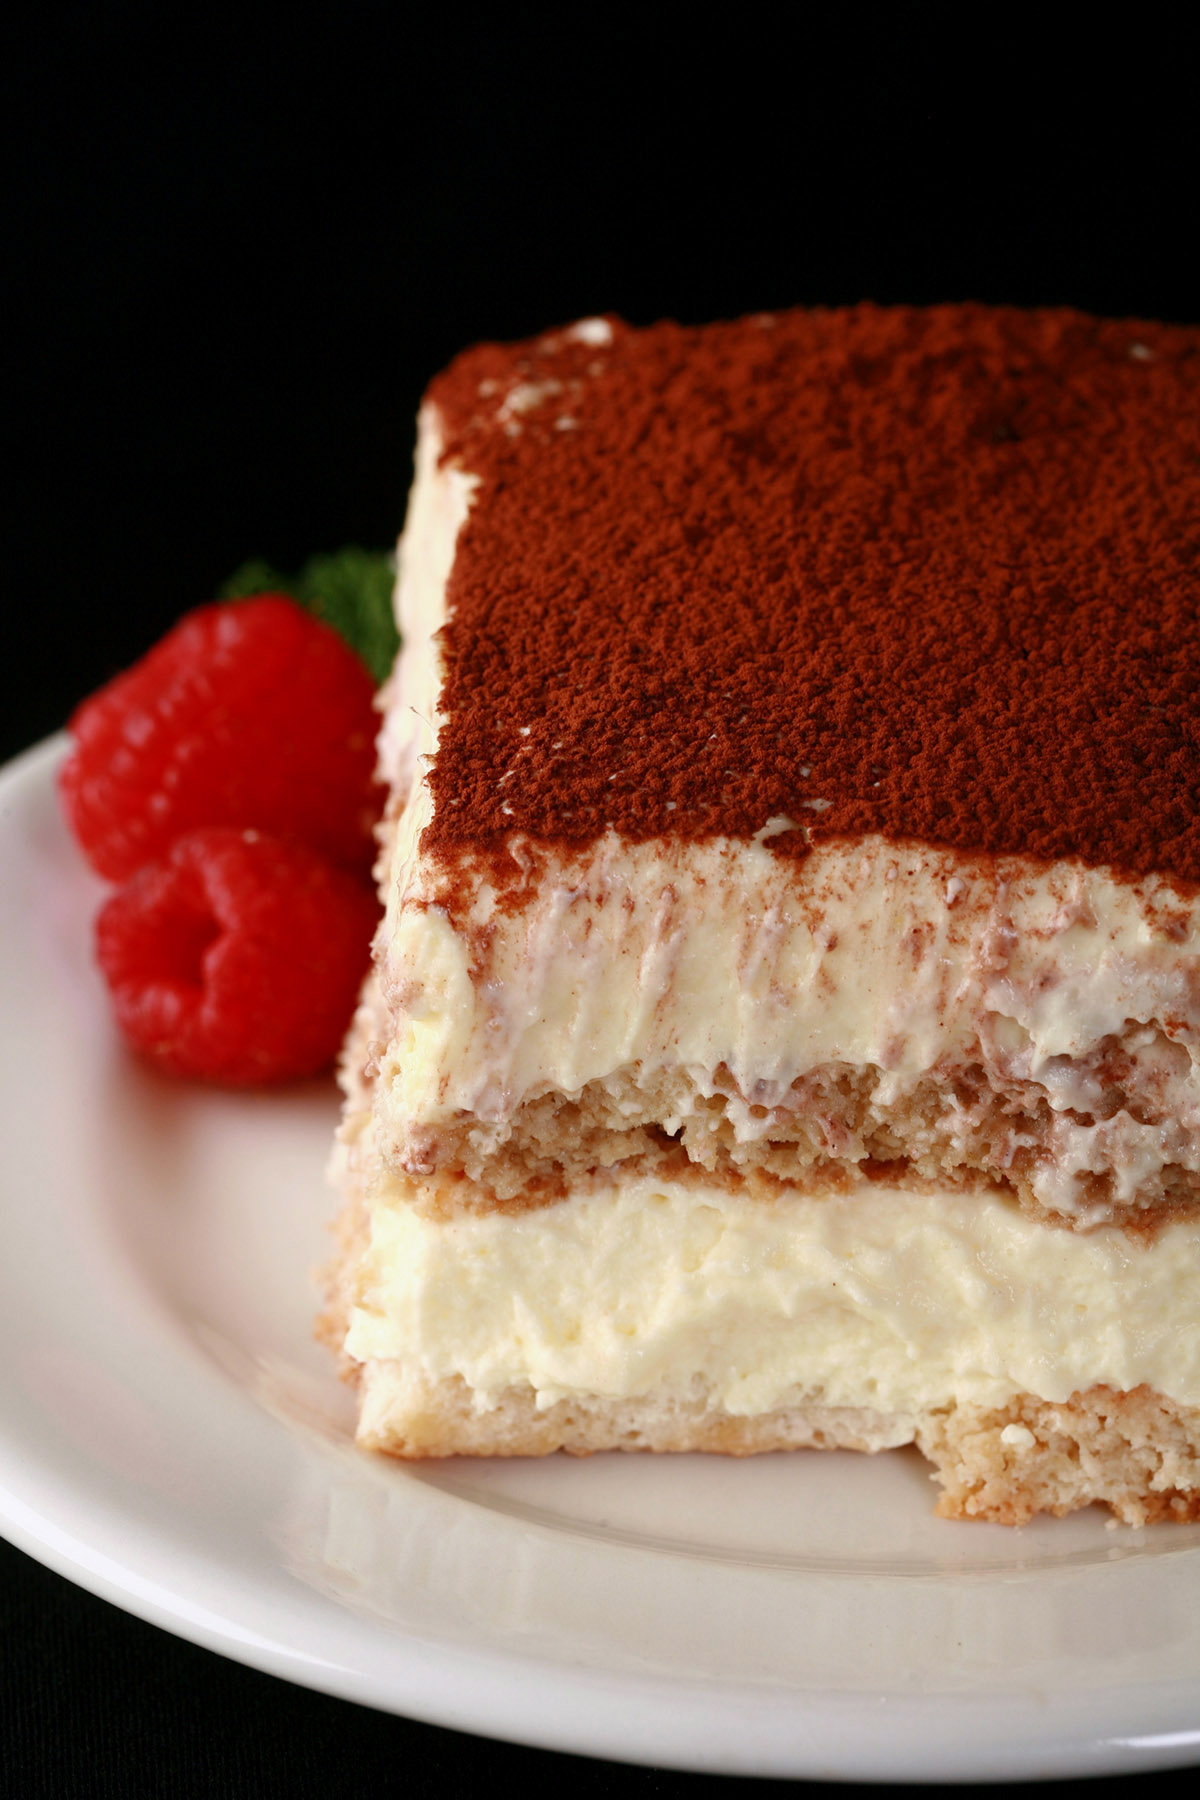 A square of low carb tiramisu on a small plate.